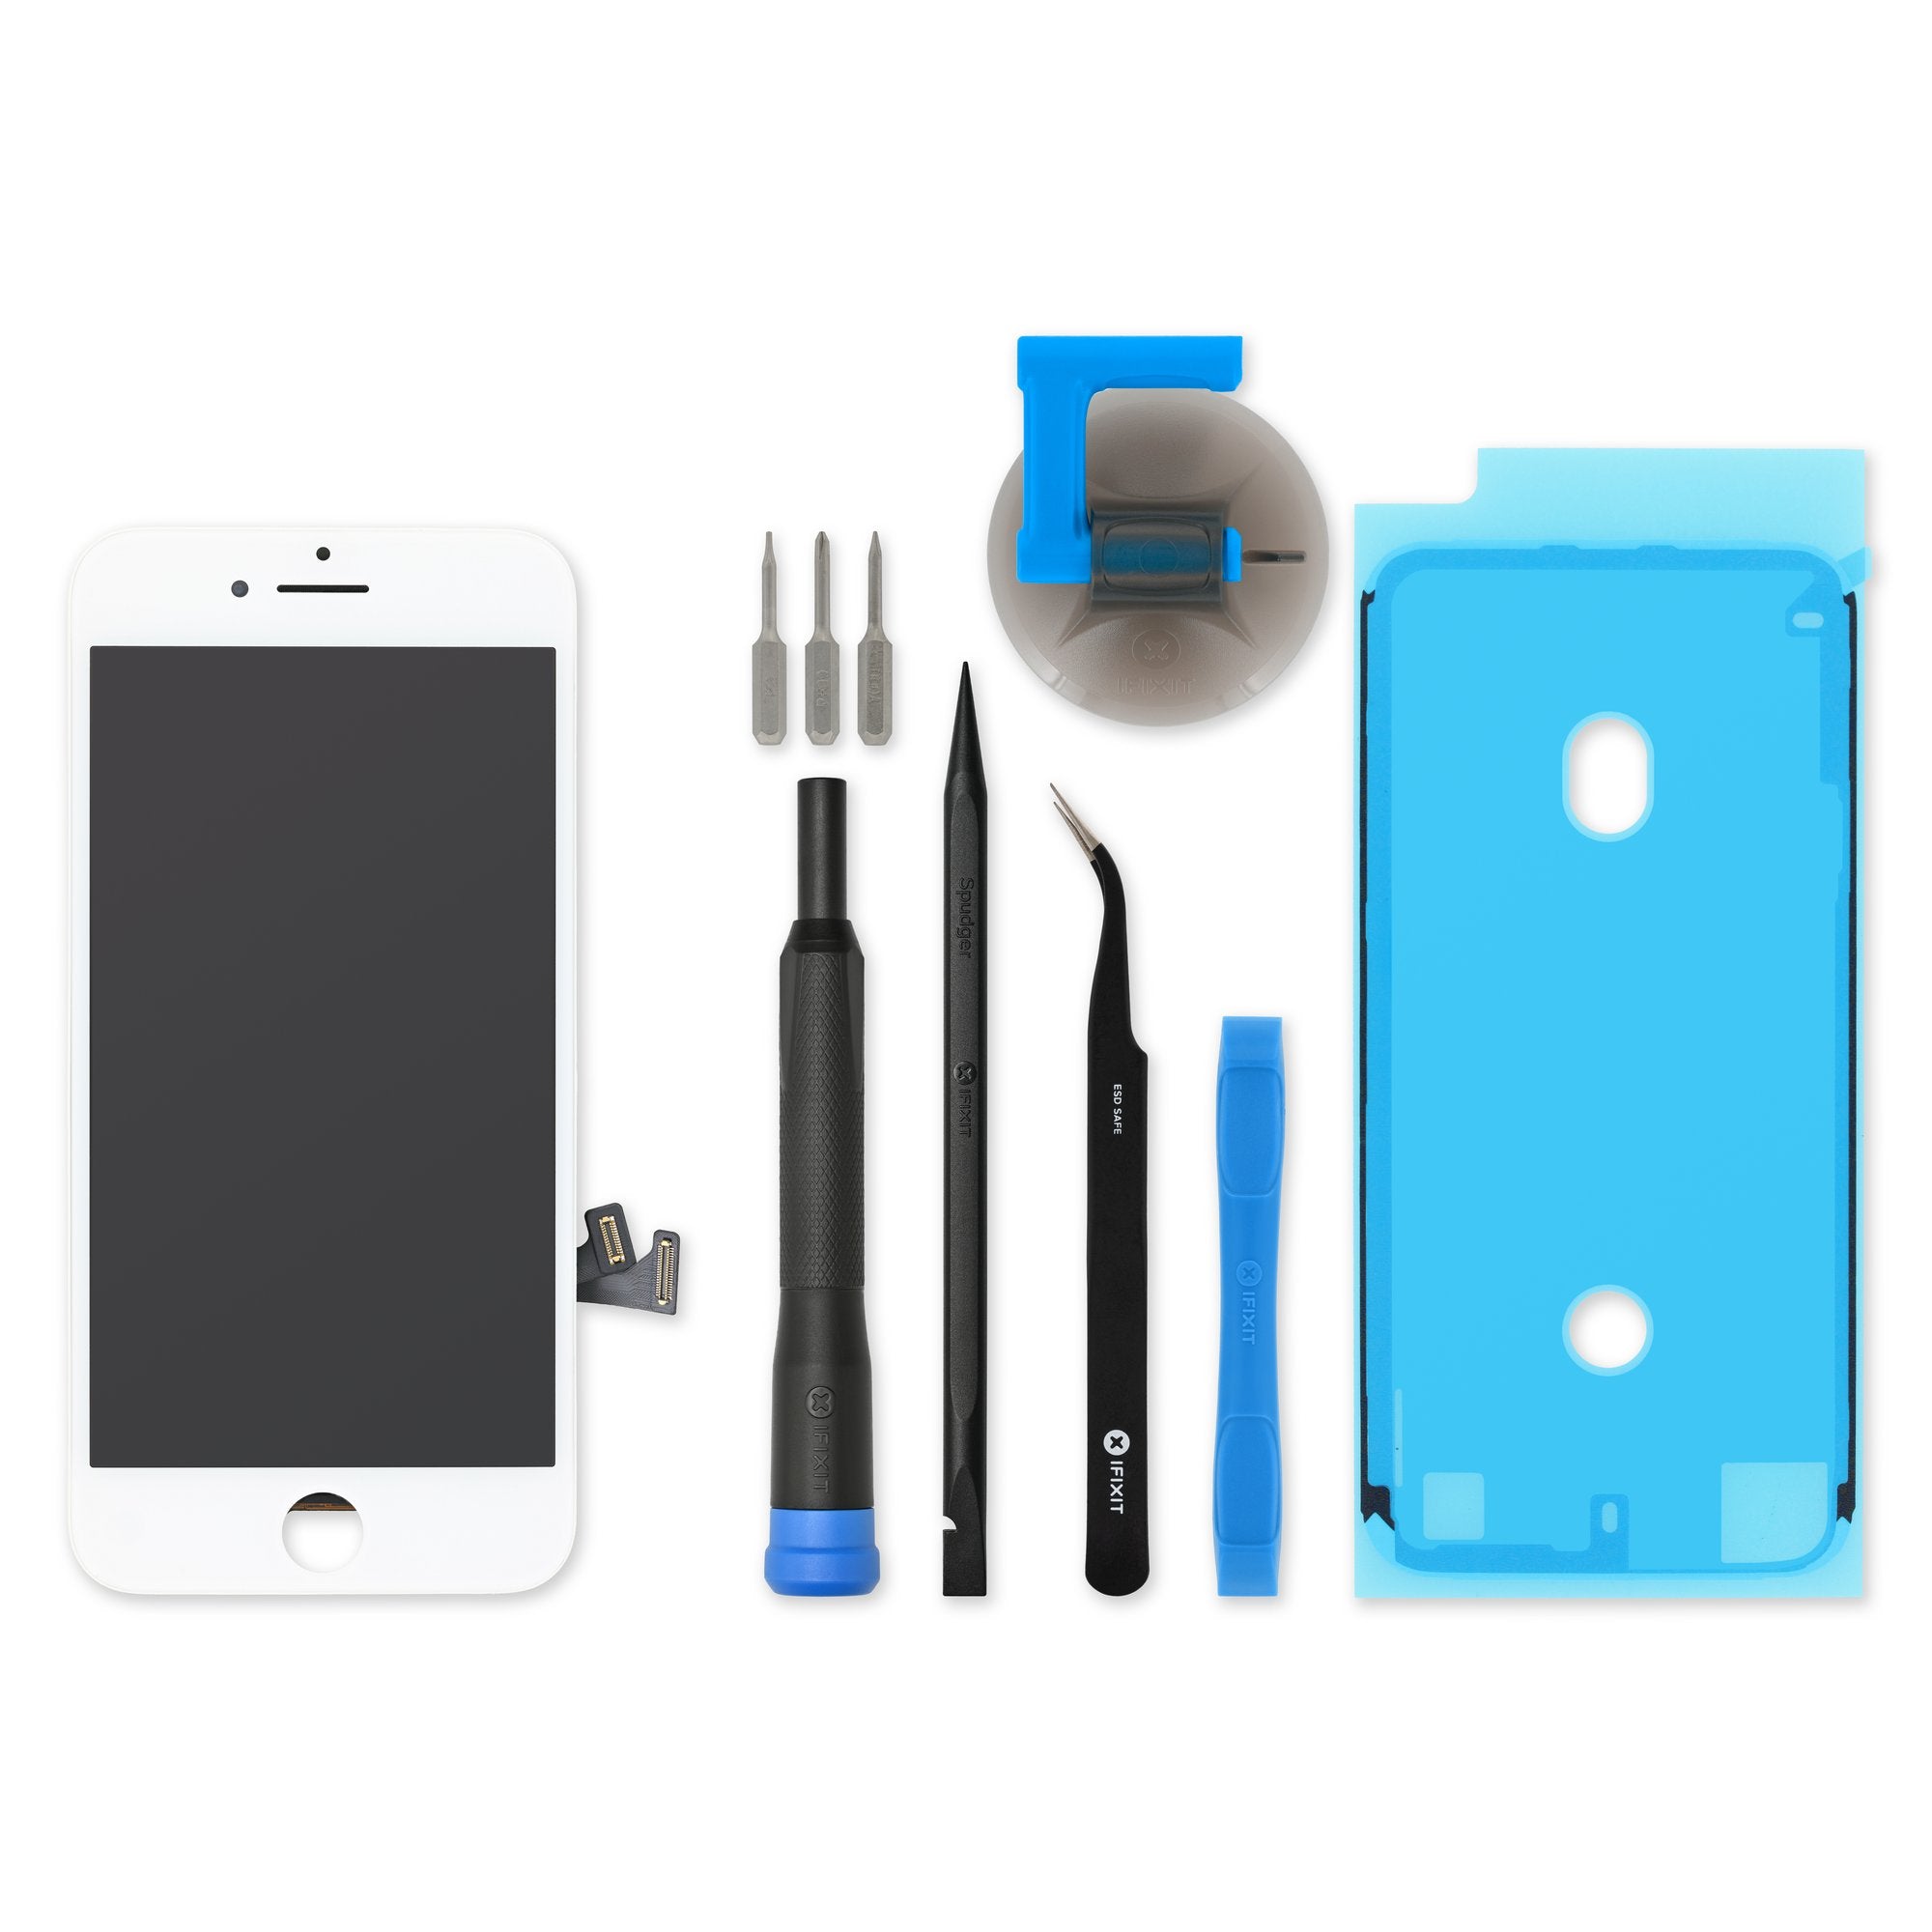 Apple iPhone 6 ( 4.7 INCHES ) Front glass screen replacement repair kit  BLACK